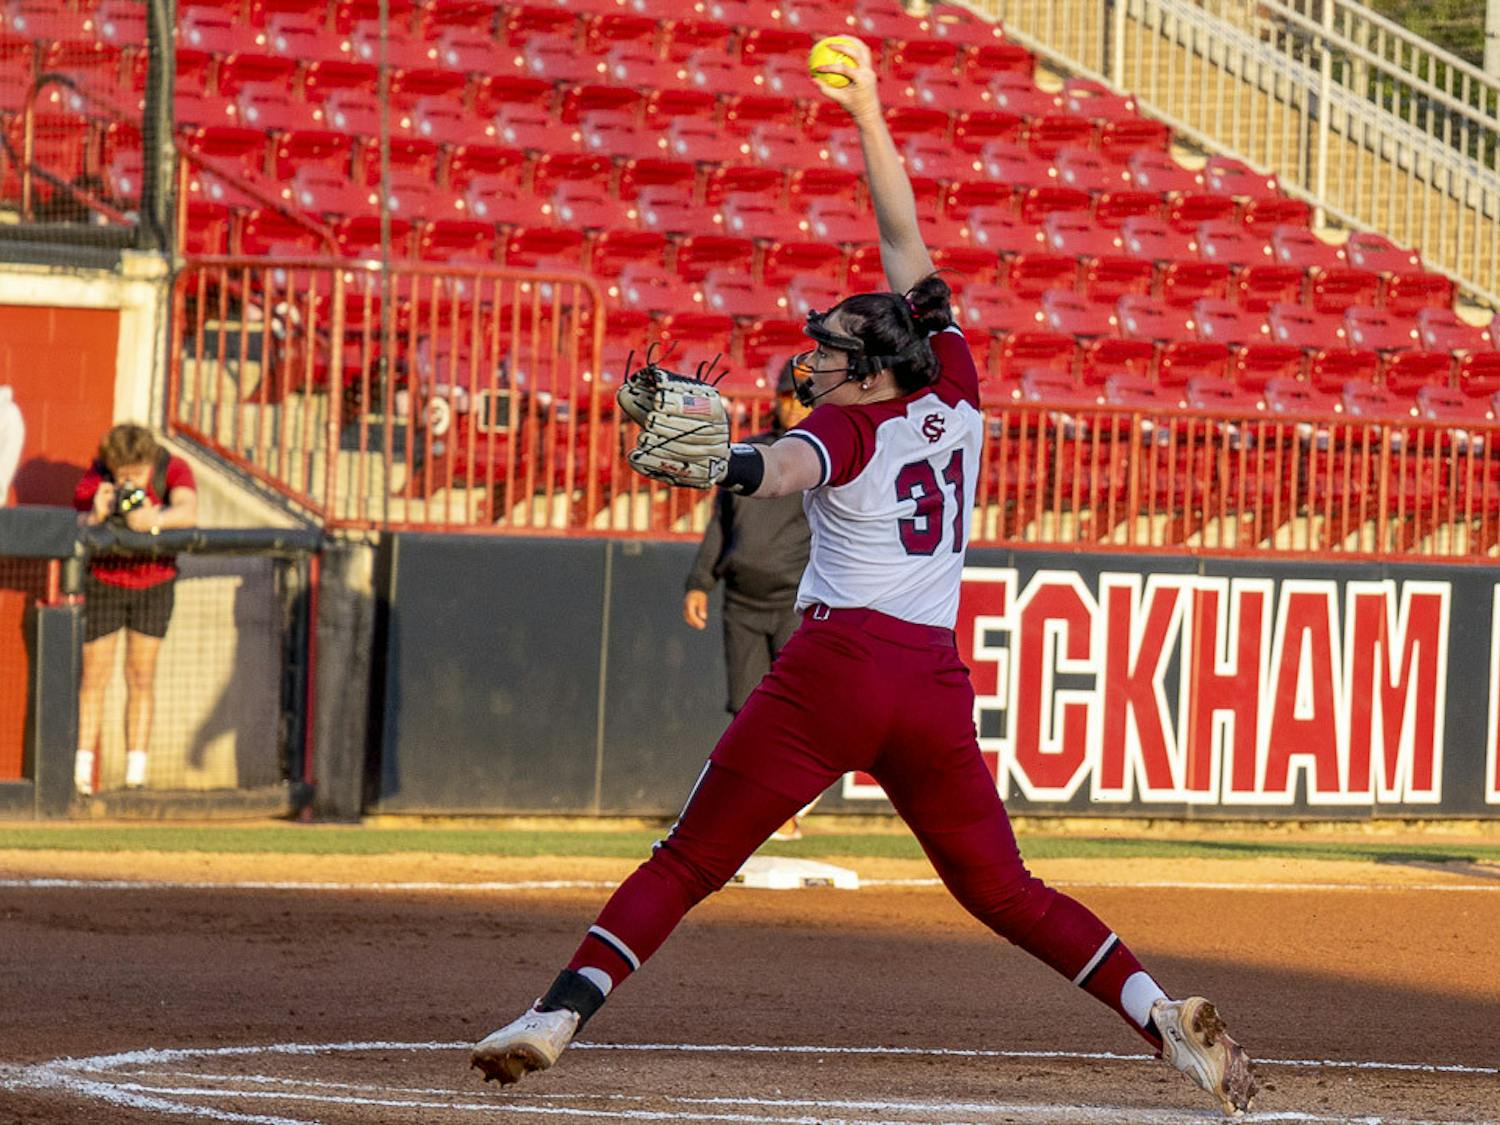 Senior pitcher Karsen Ochs winds up before throwing the ball to Campbell University's batter during the matchup at Beckham Park on Feb. 19, 2023. The Gamecocks beat the Camels 2-1.&nbsp;